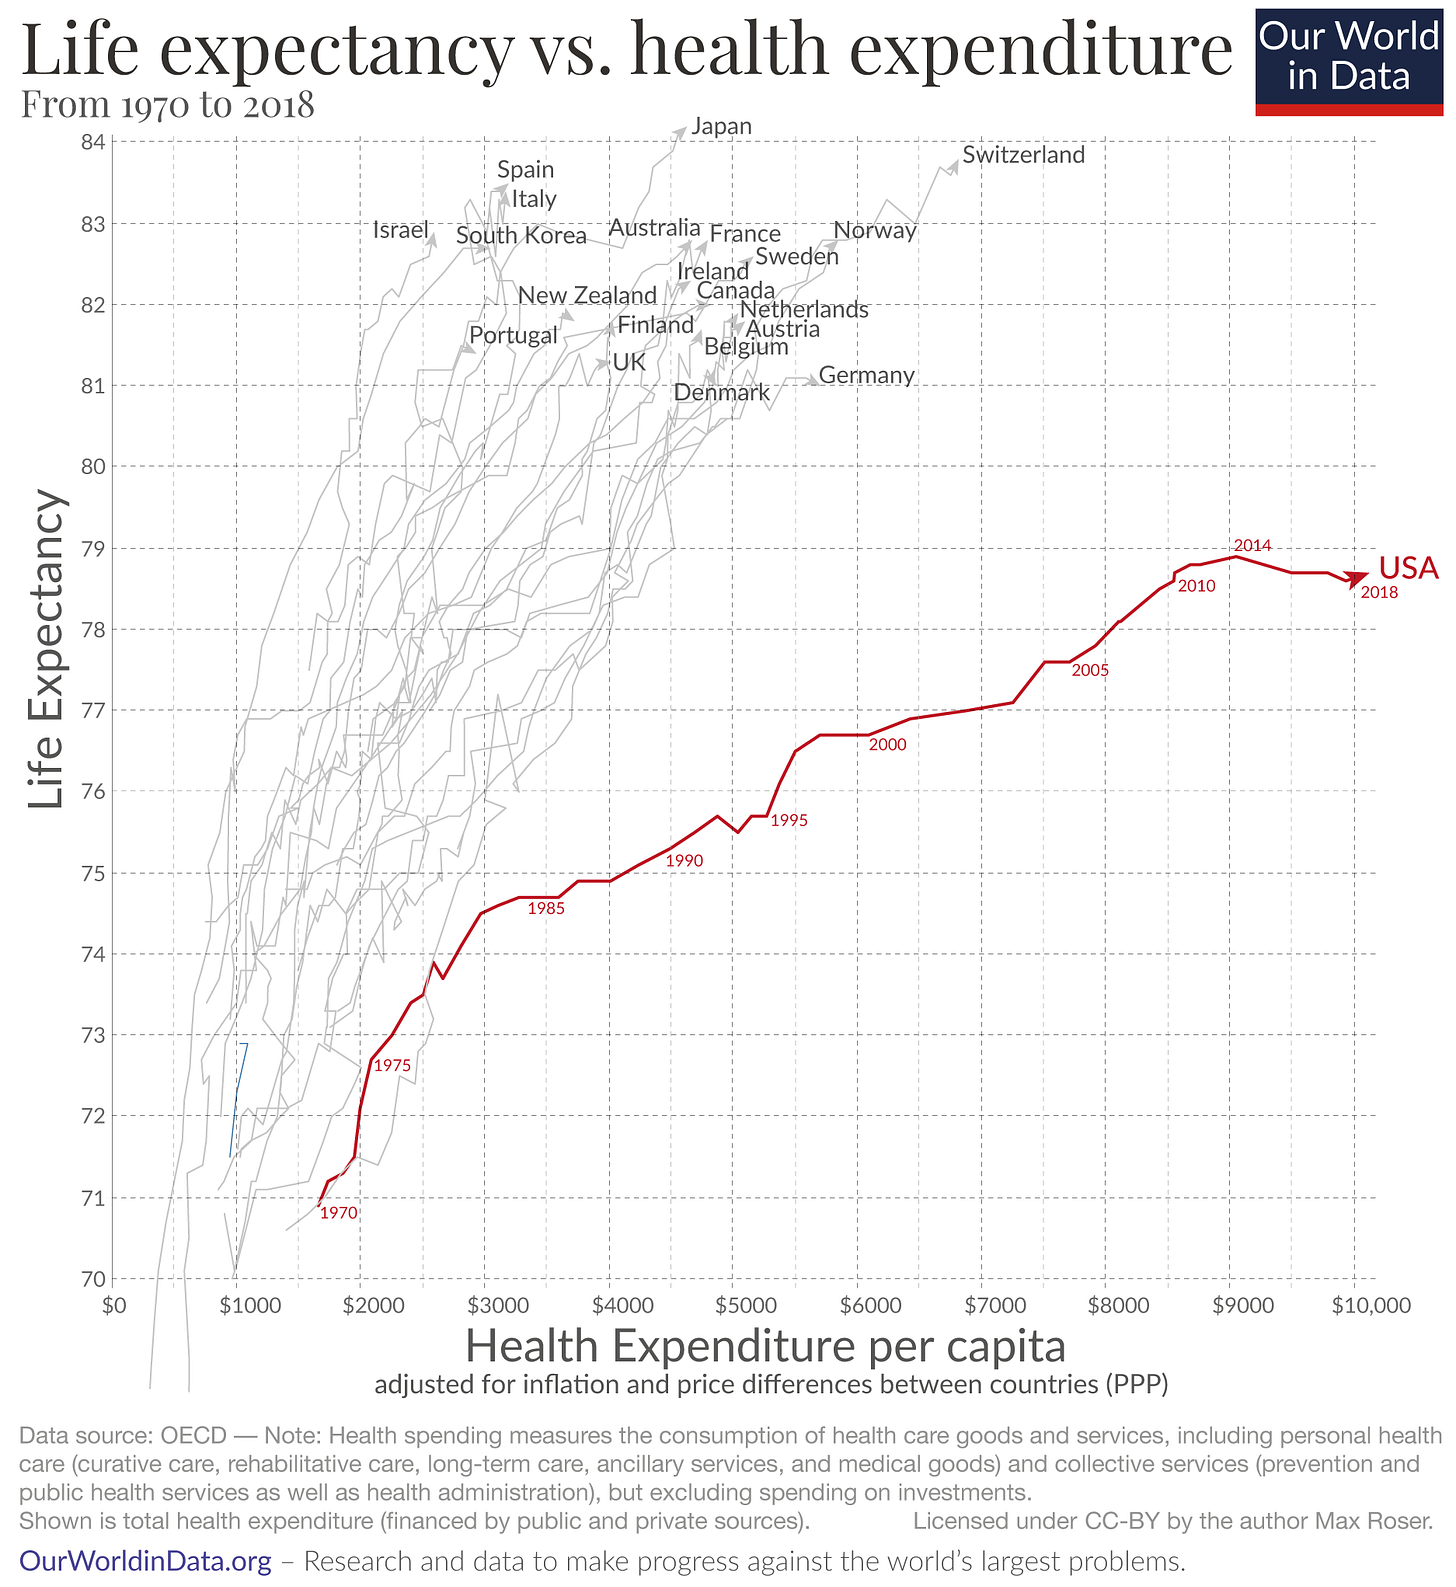 World Life Expectancy vs. Health Expenditure 